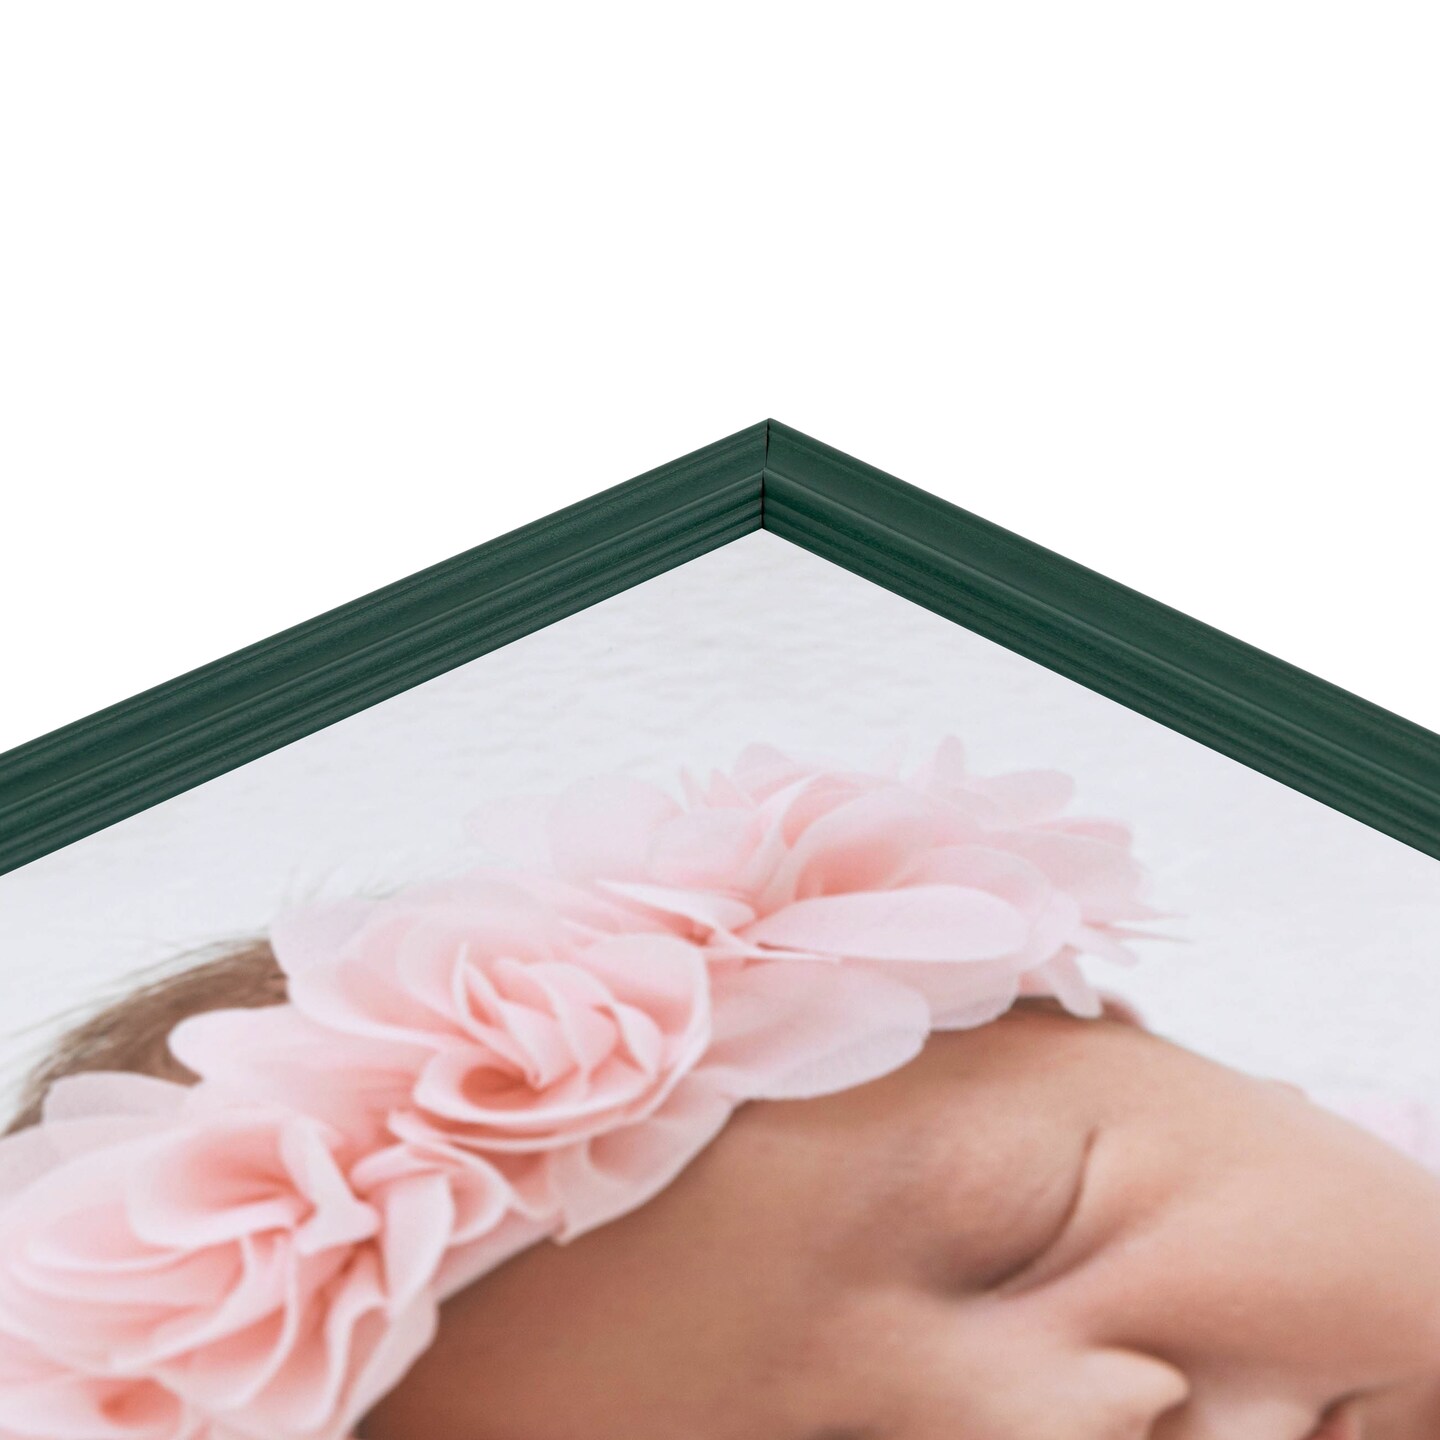 ArtToFrames 12x20 Inch  Picture Frame, This 1 Inch Custom Wood Poster Frame is Available in Multiple Colors, Great for Your Art or Photos - Comes with Regular Glass and  Corrugated Backing (A9IK)